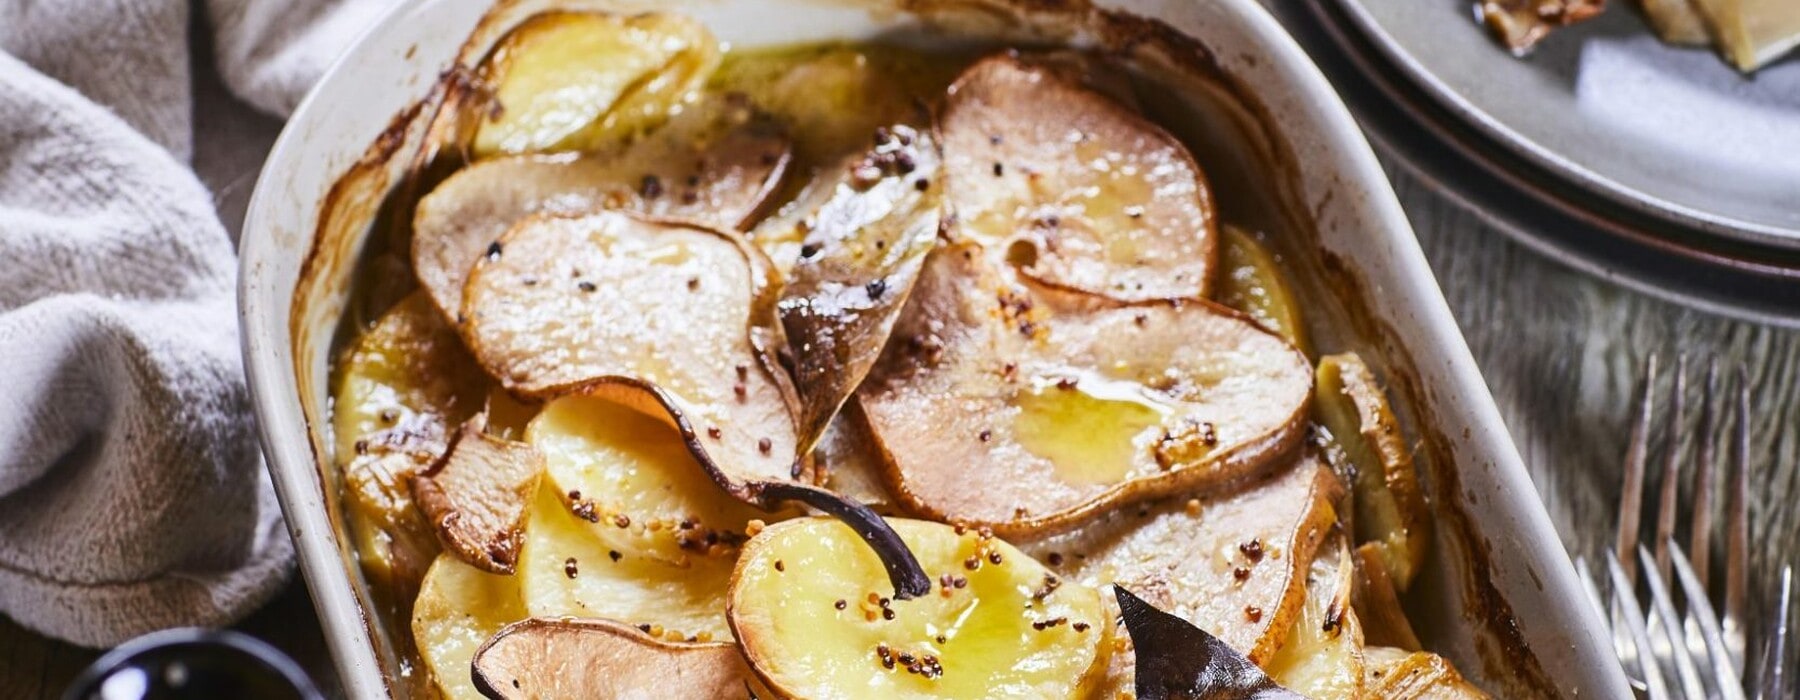 Potato, leek and pear bake served with cutlery on an oval shaped white dish set on top fo a brown table